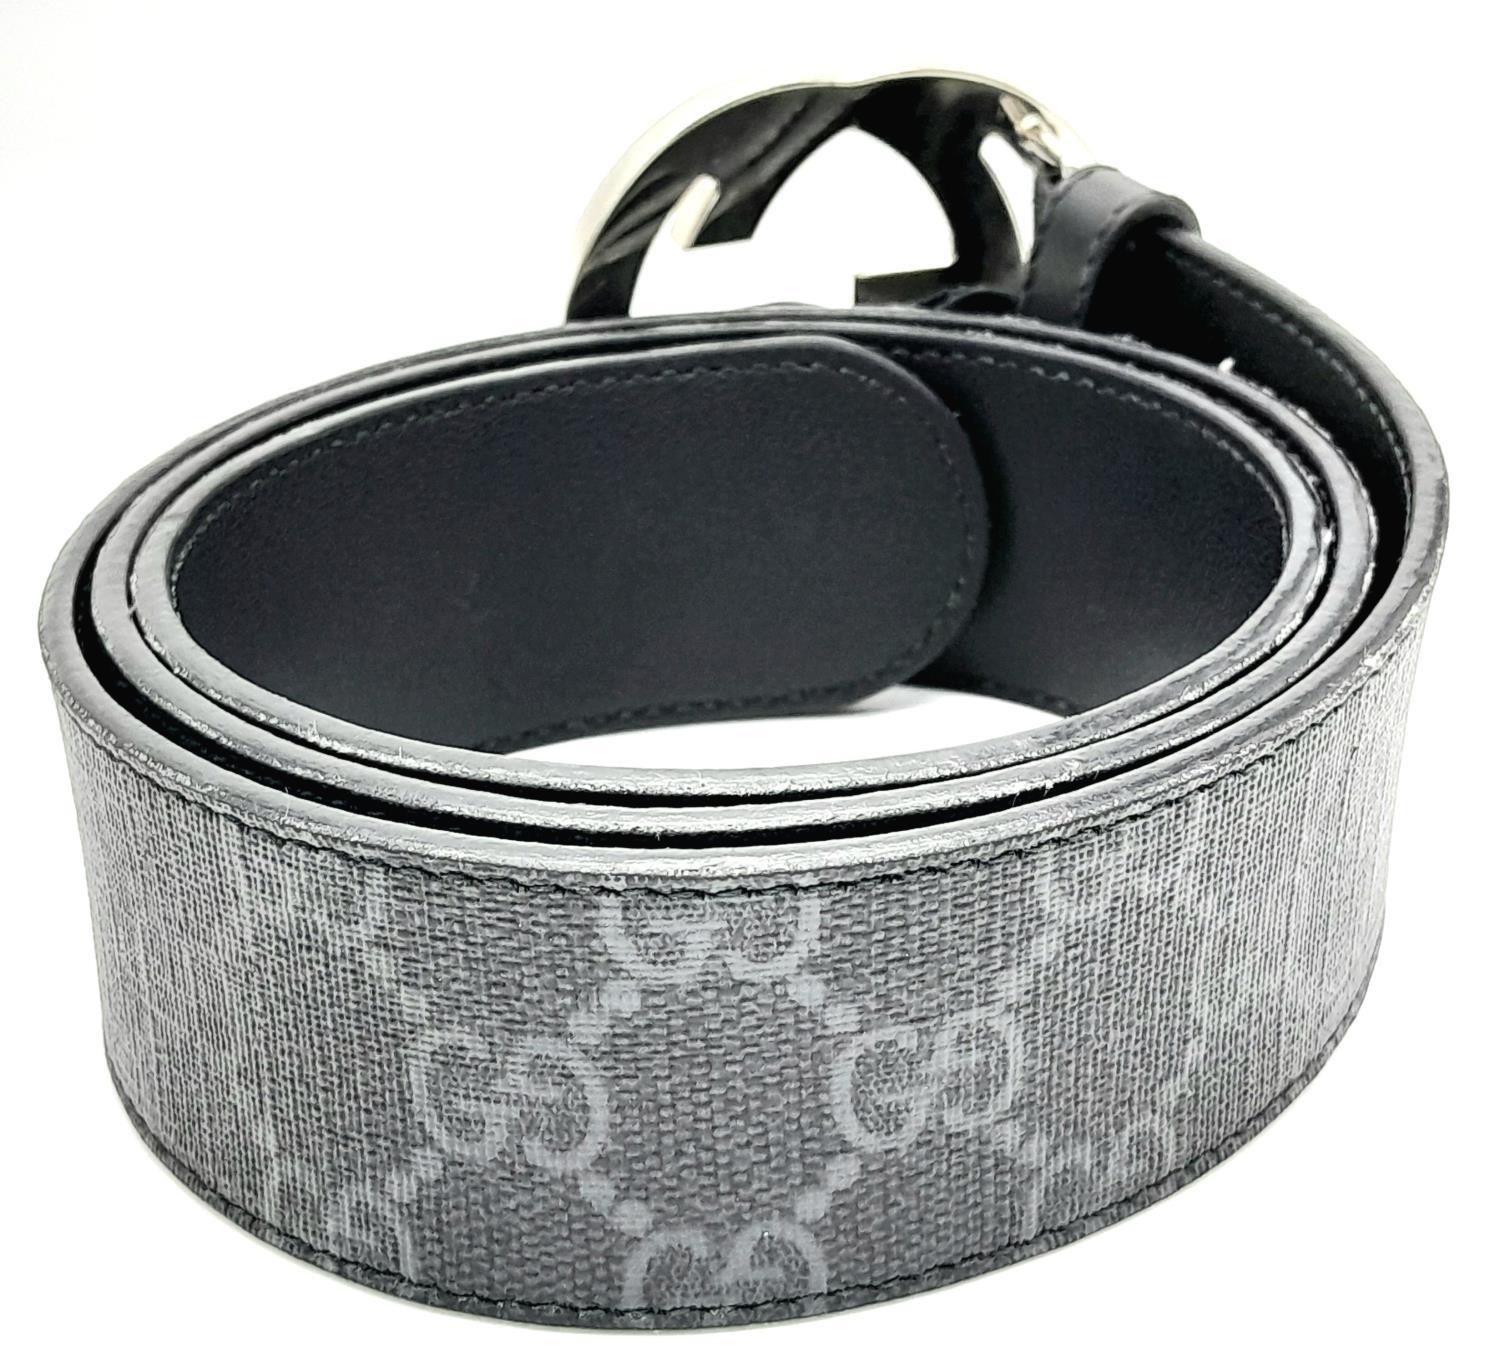 A Gucci Black with Grey Monogram Men's GG Belt. Silver-toned hardware. Approximately 104.5cm length, - Image 4 of 7